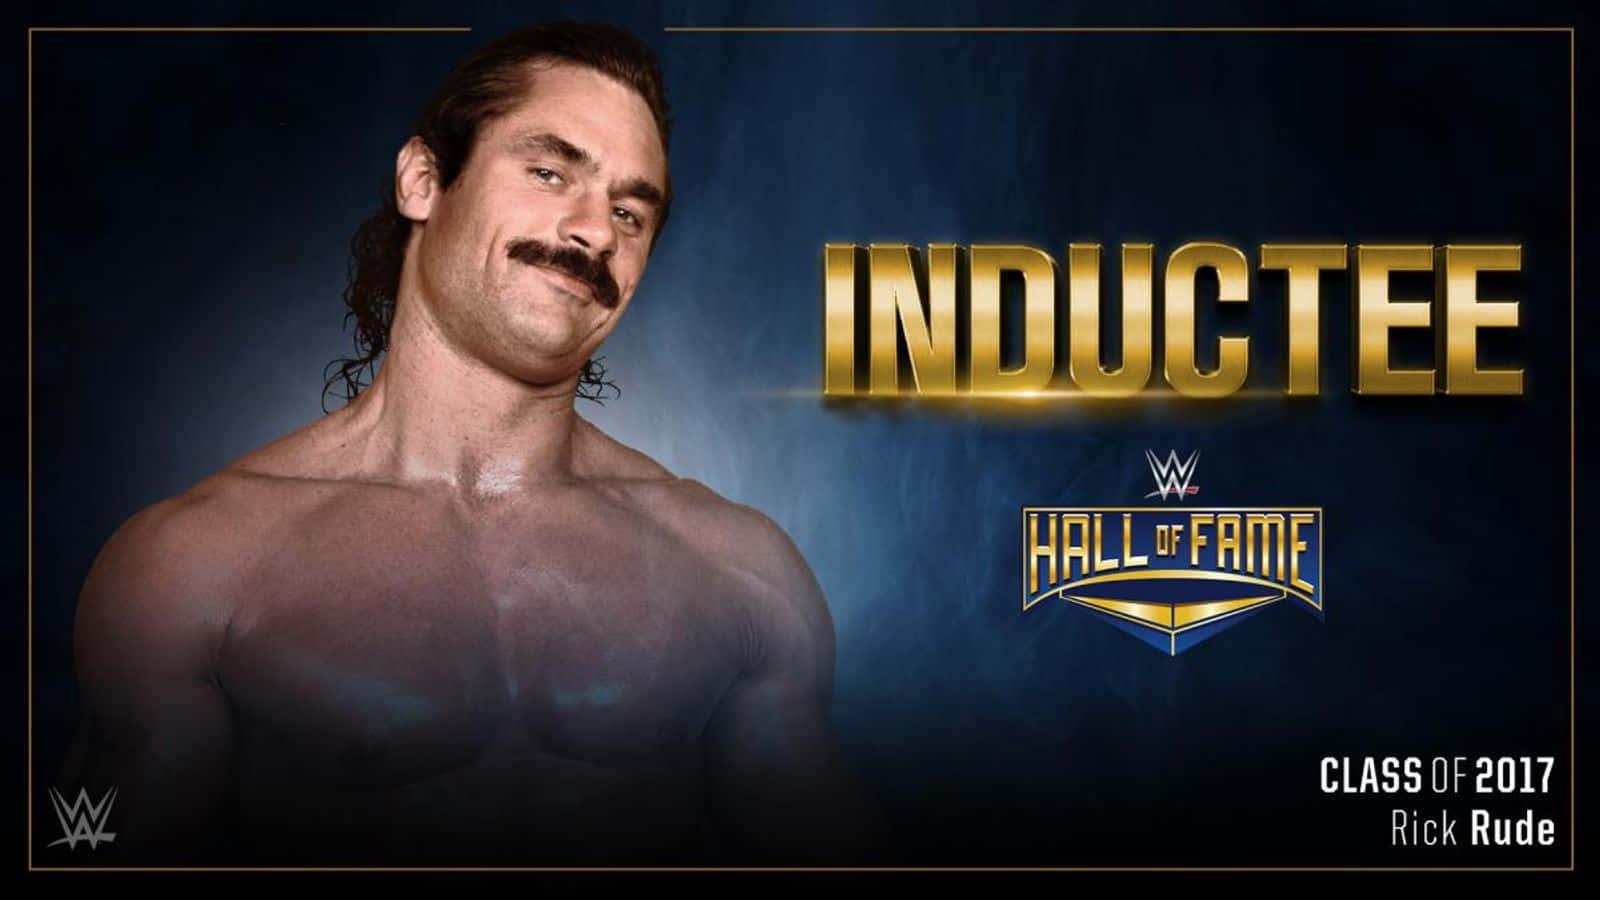 Rickrude Wwe Hall Of Fame Inductee Poster Foto Wallpaper